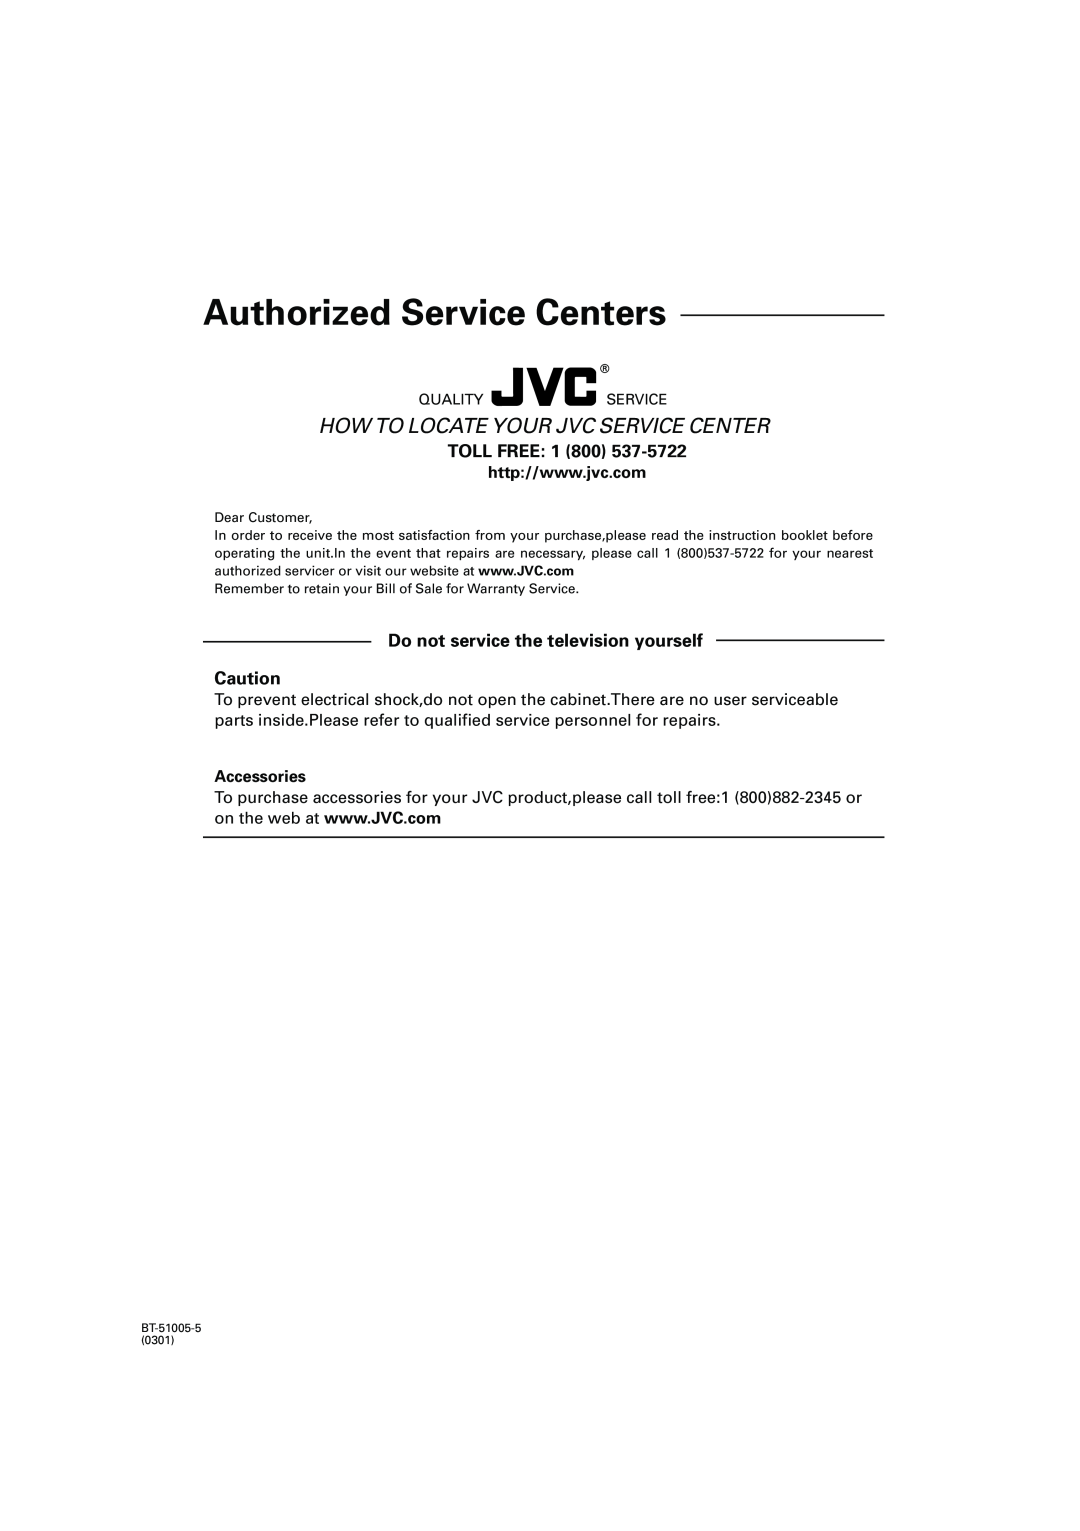 JVC TH-A25 manual Authorized Service Centers, How To Locate Your Jvc Service Center, TOLL FREE: 1 800, Accessories 